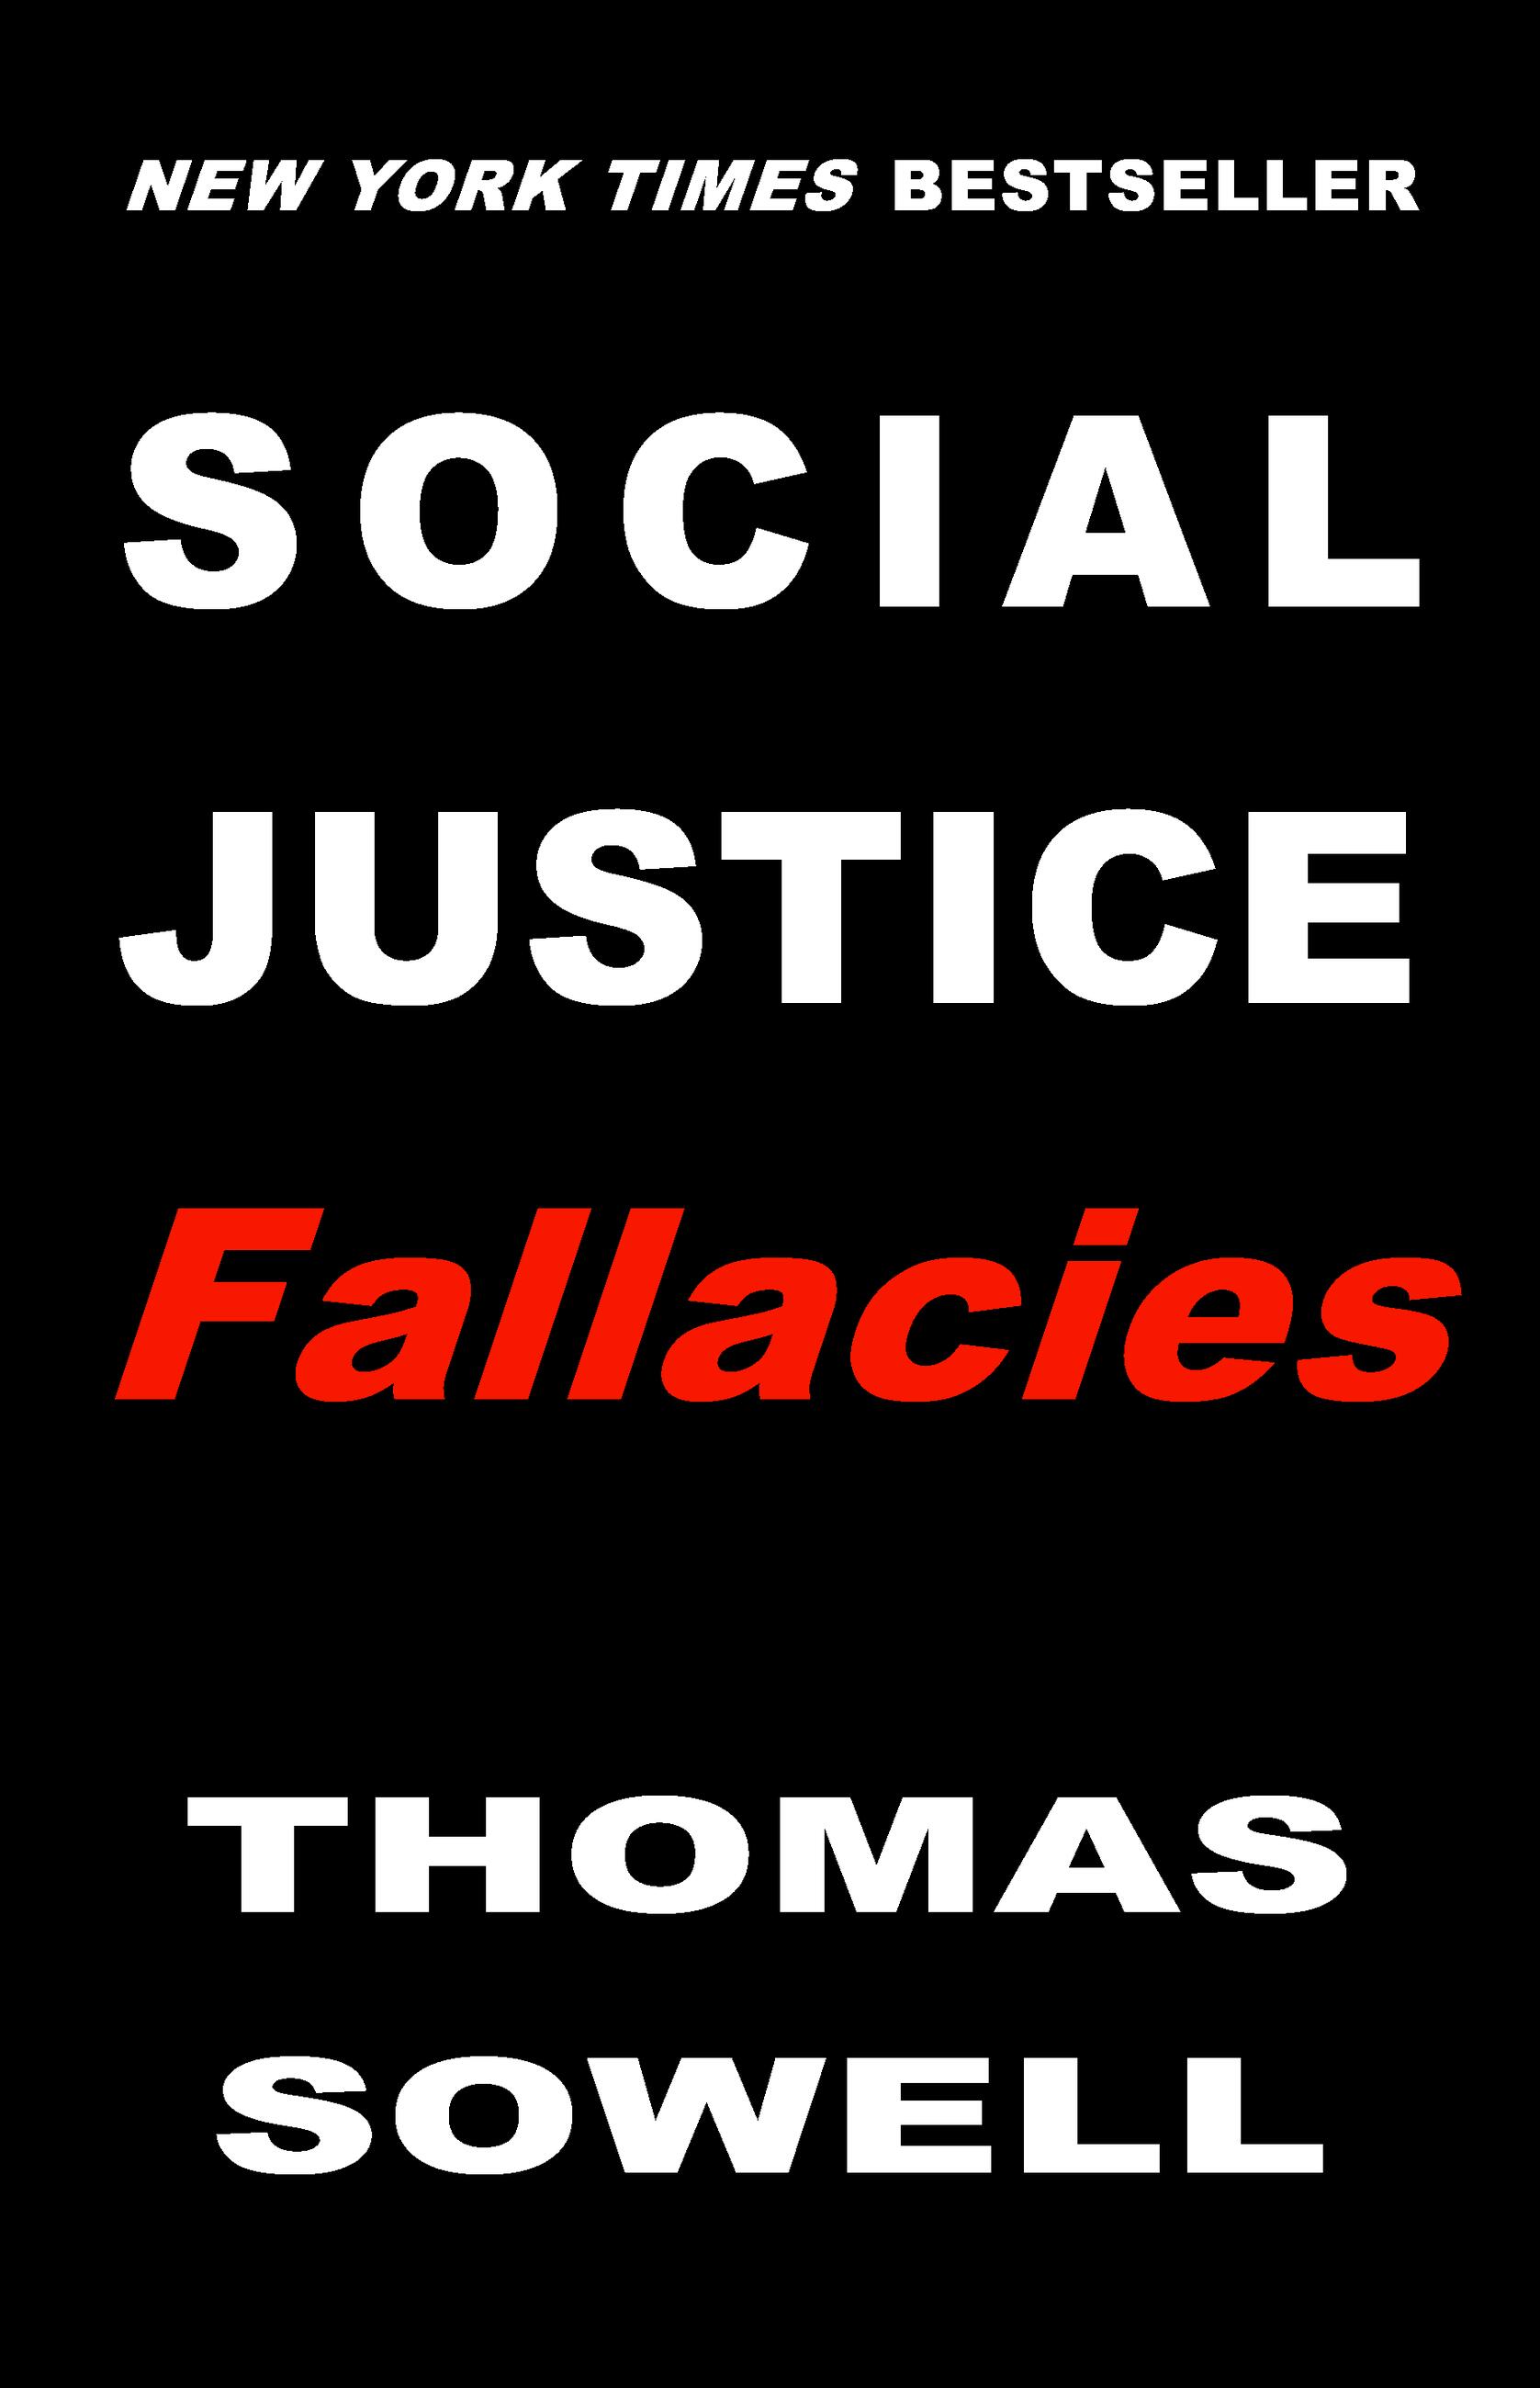 Book　Fallacies　Sowell　Hachette　Group　by　Justice　Social　Thomas